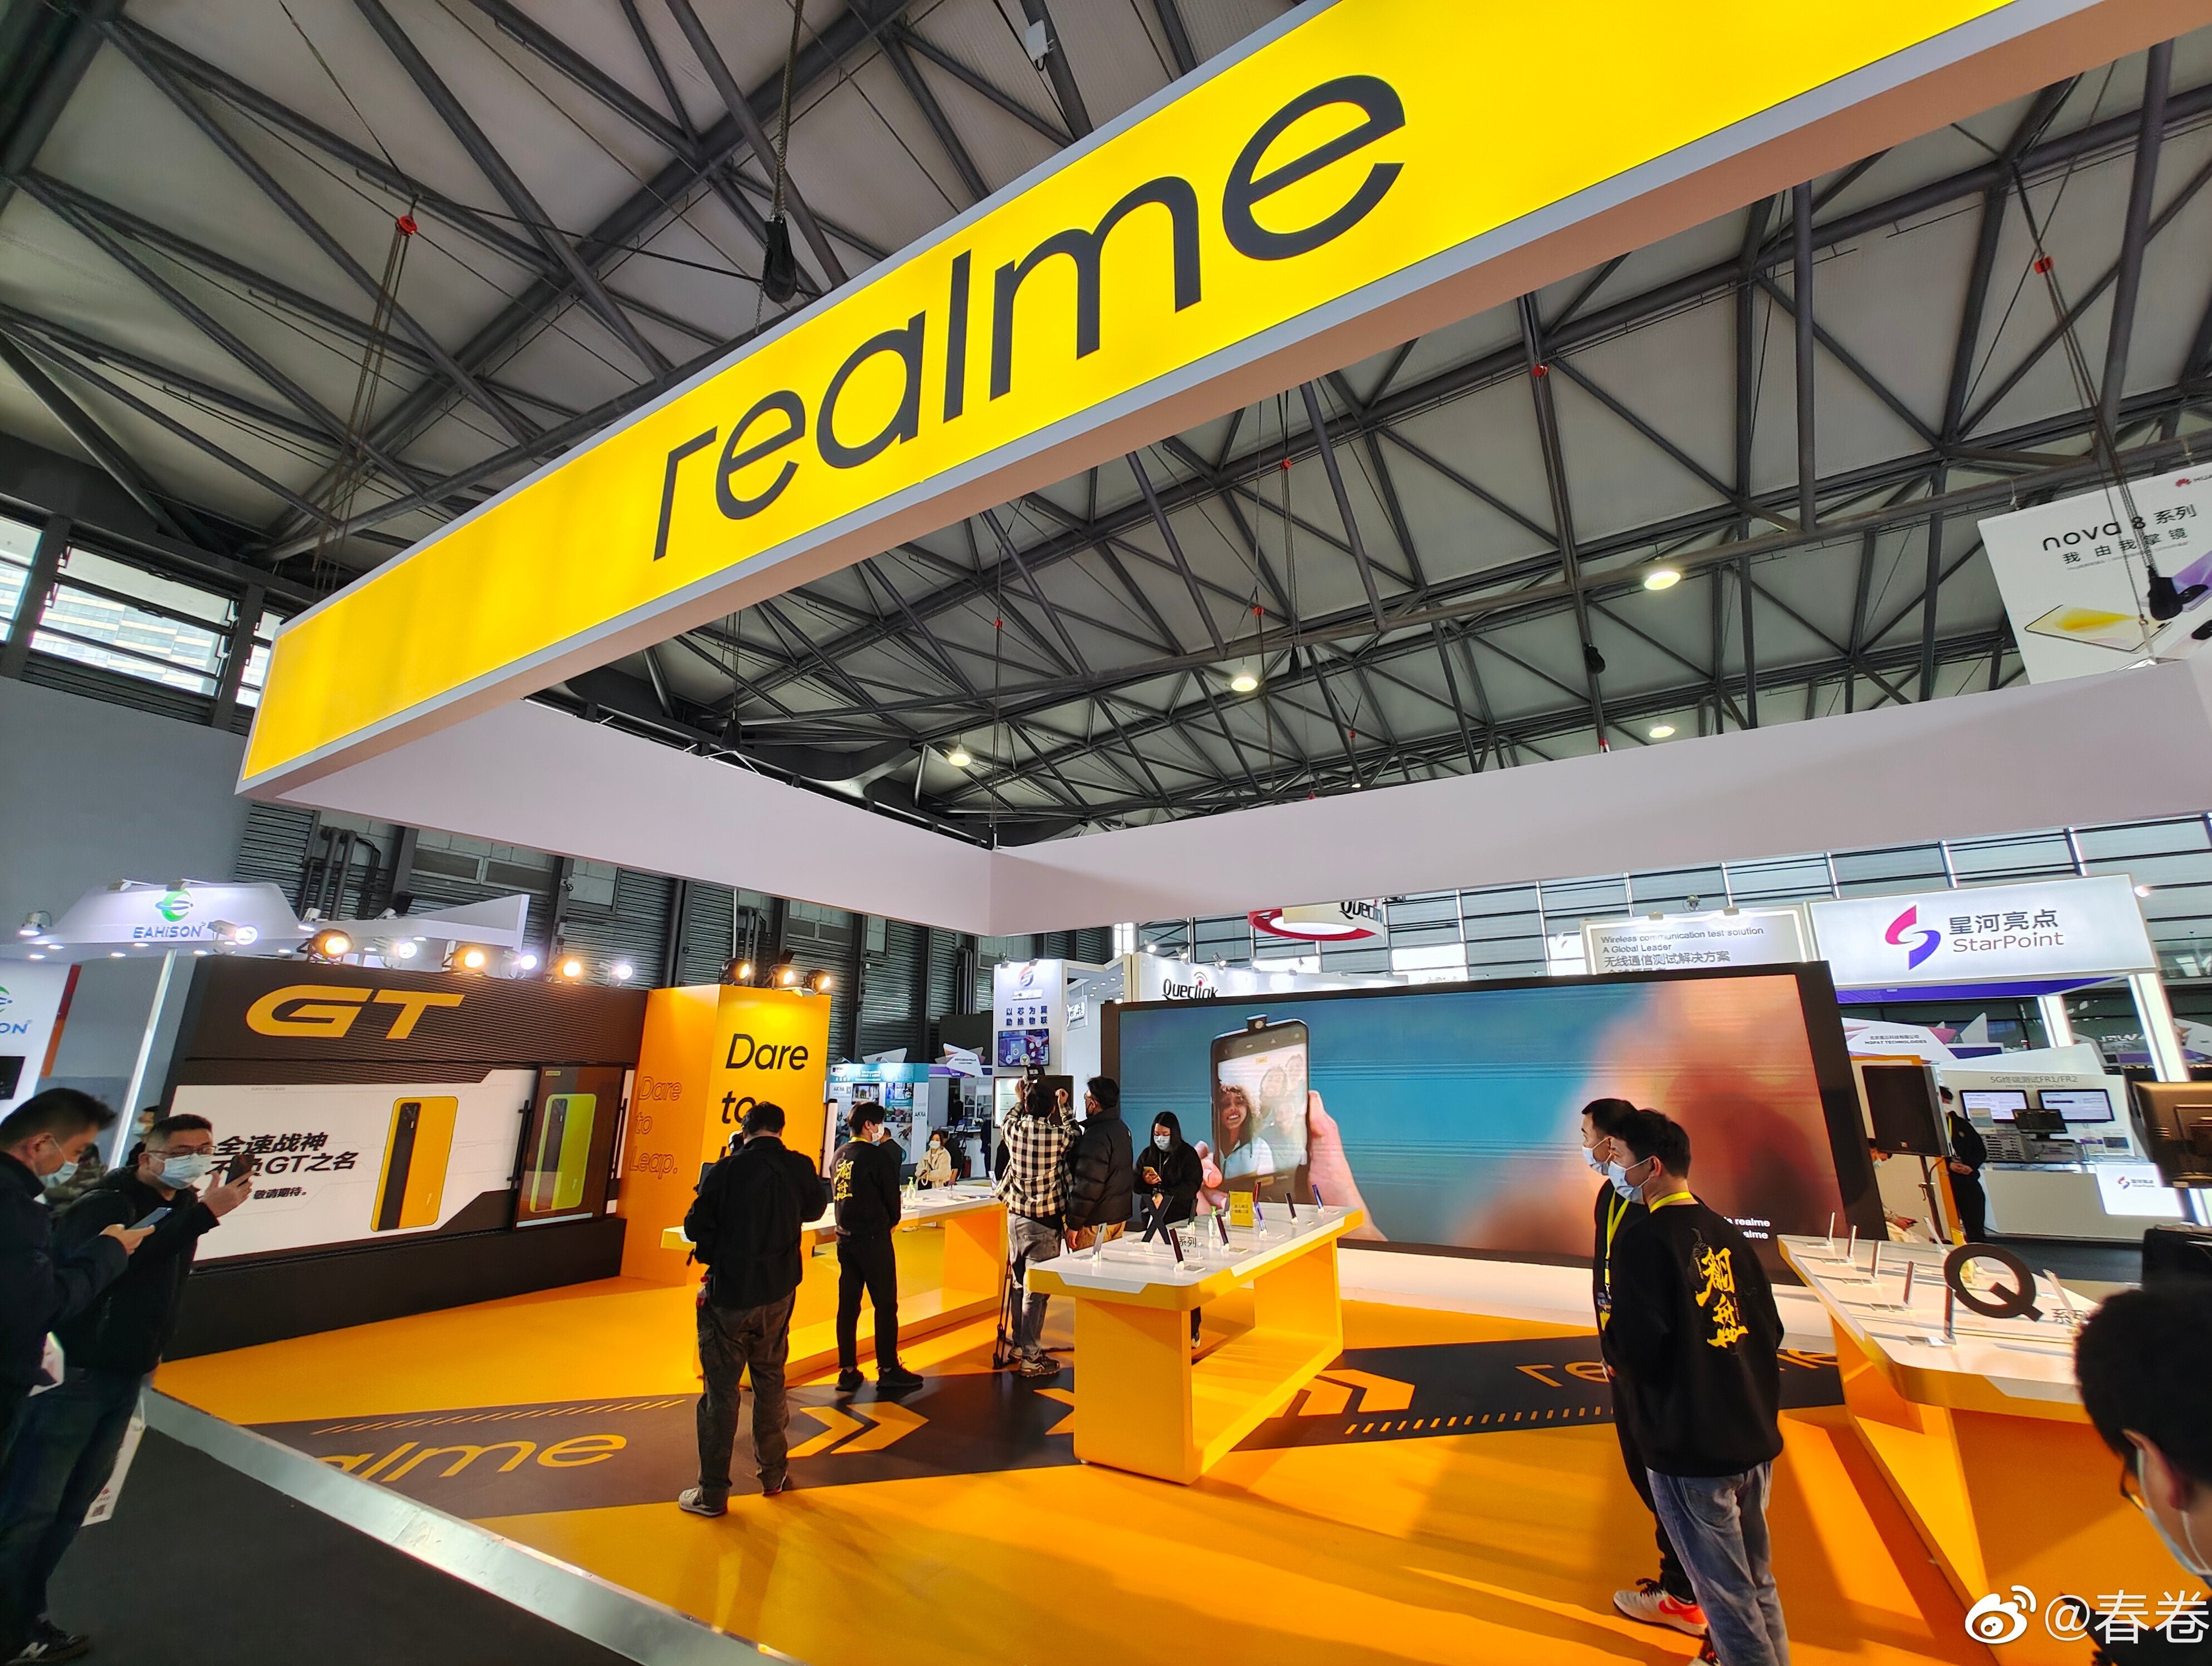 Realme is clearly hedging its bets – after achieving success in India it said in May 2019 that it was targeting its home market in China, with the aim of becoming a leading player there. Photo: Weibo